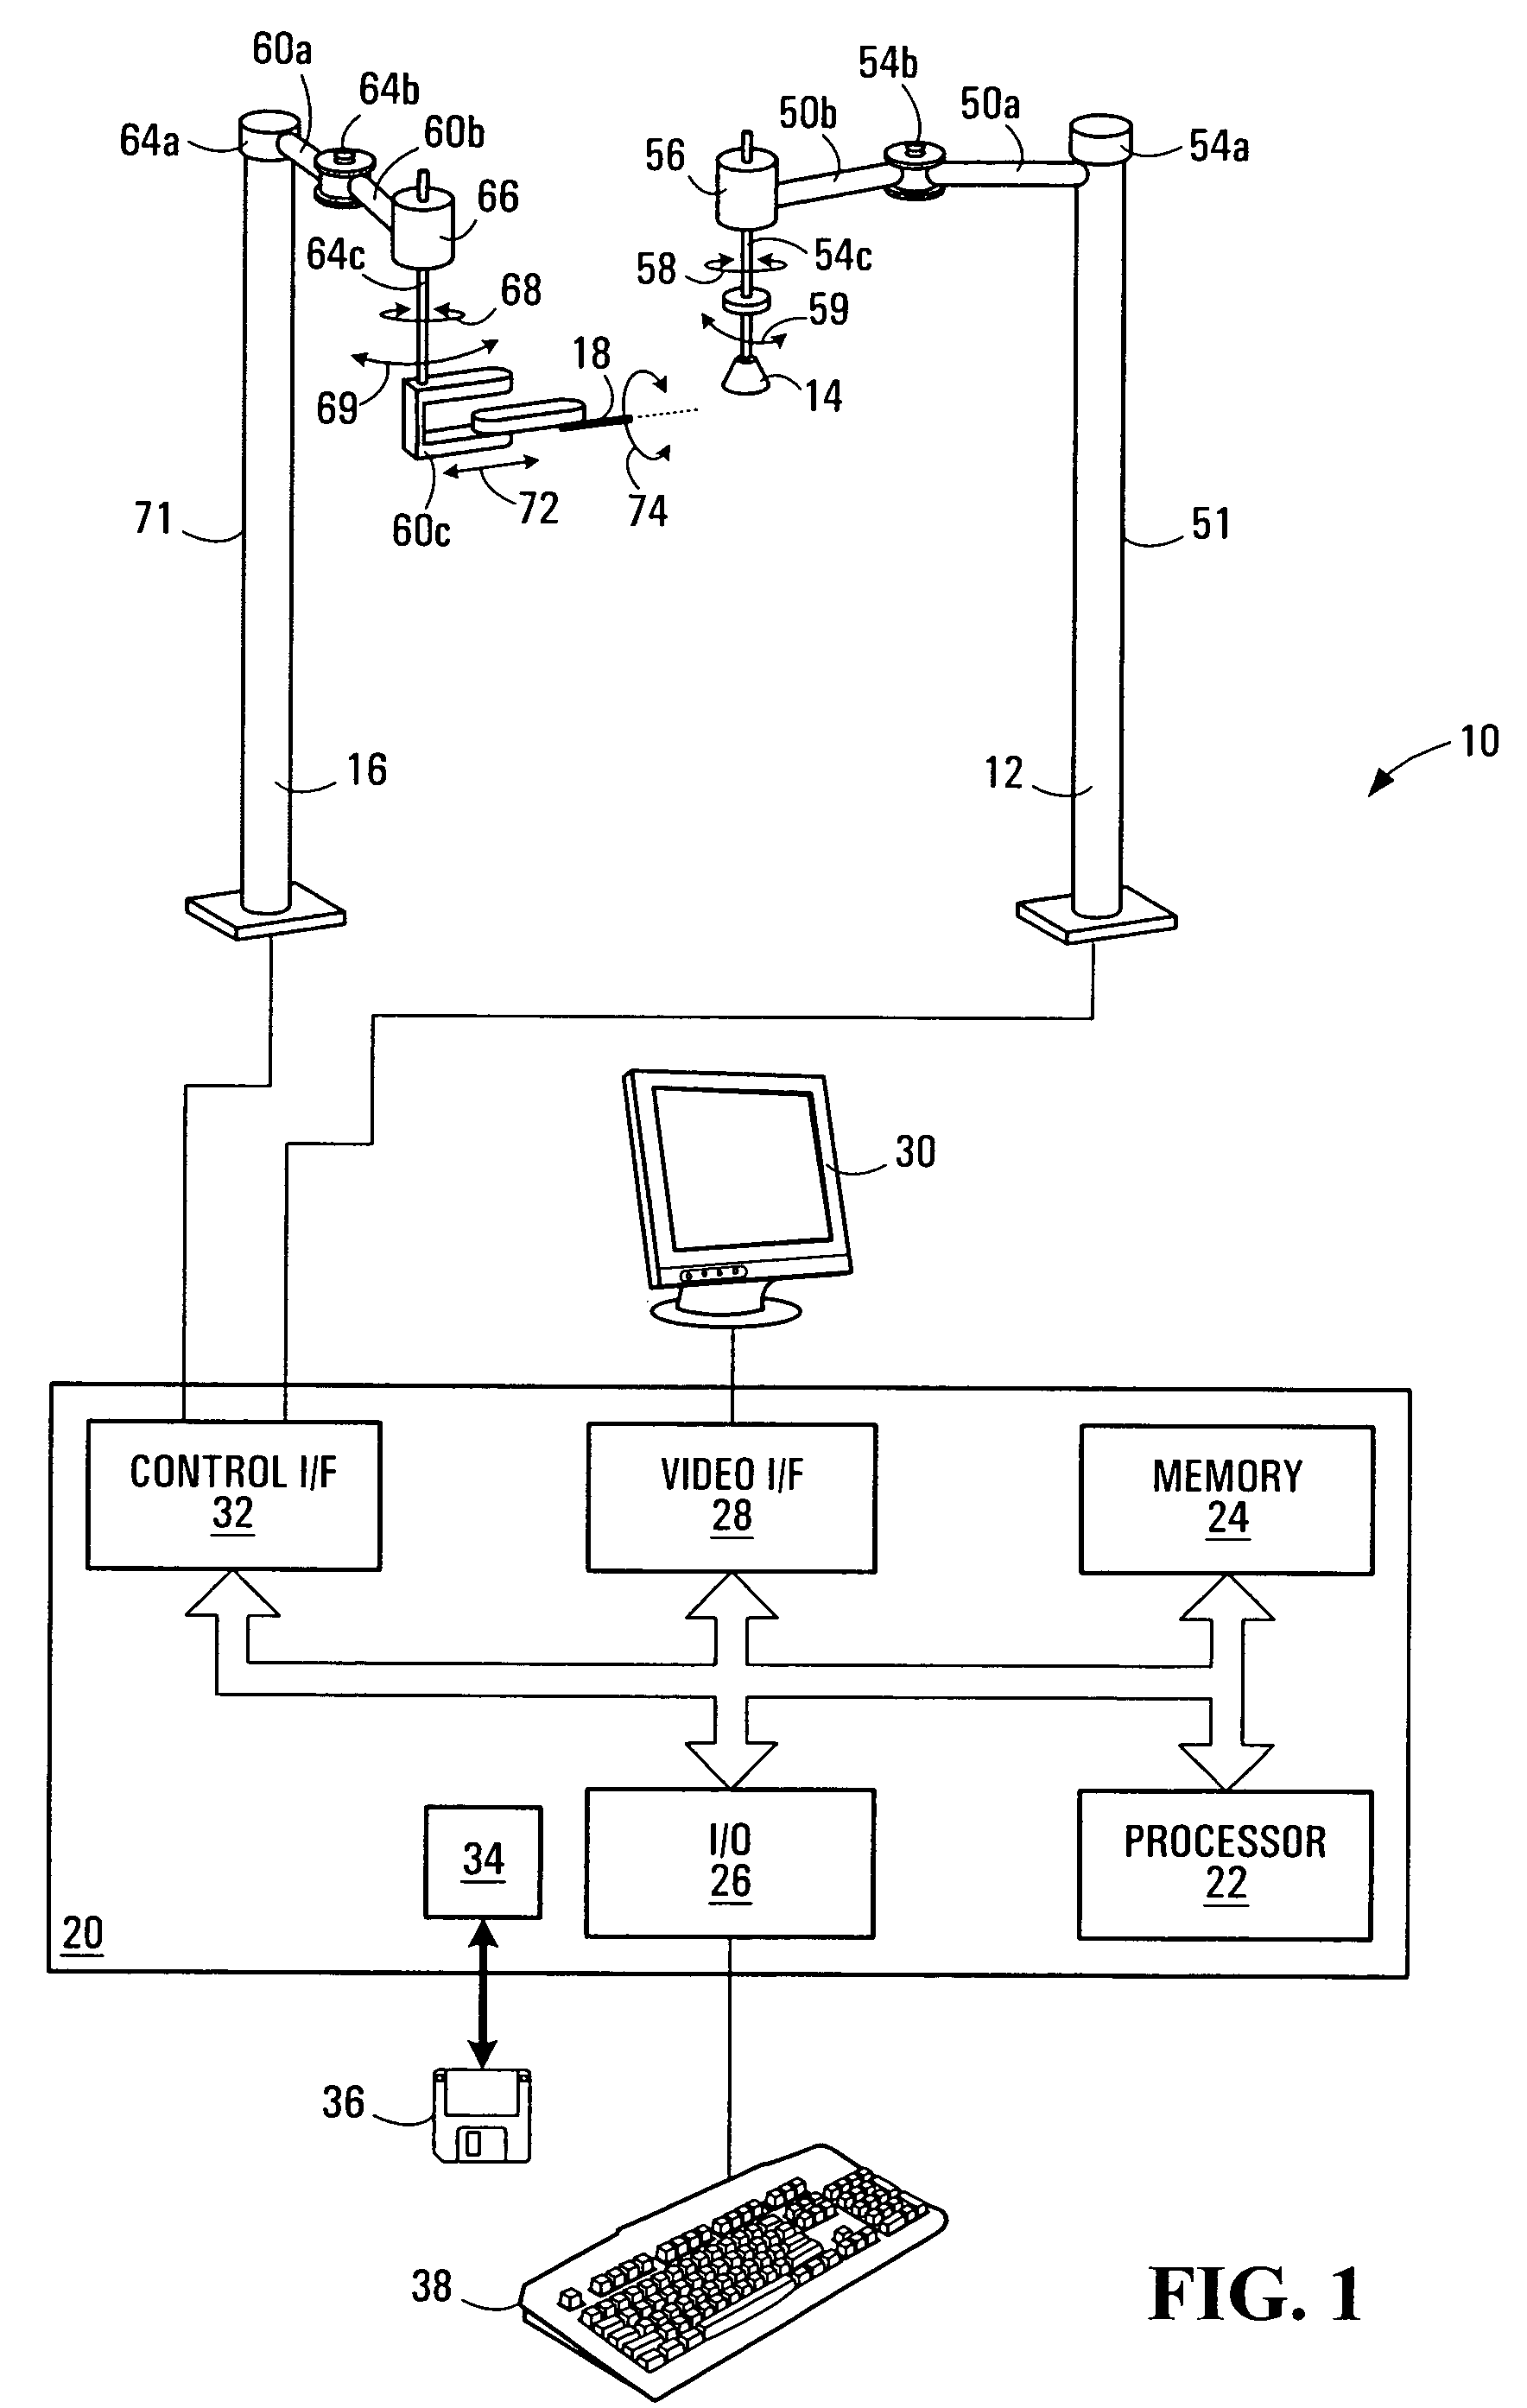 Apparatus and method for removing abnormal tissue